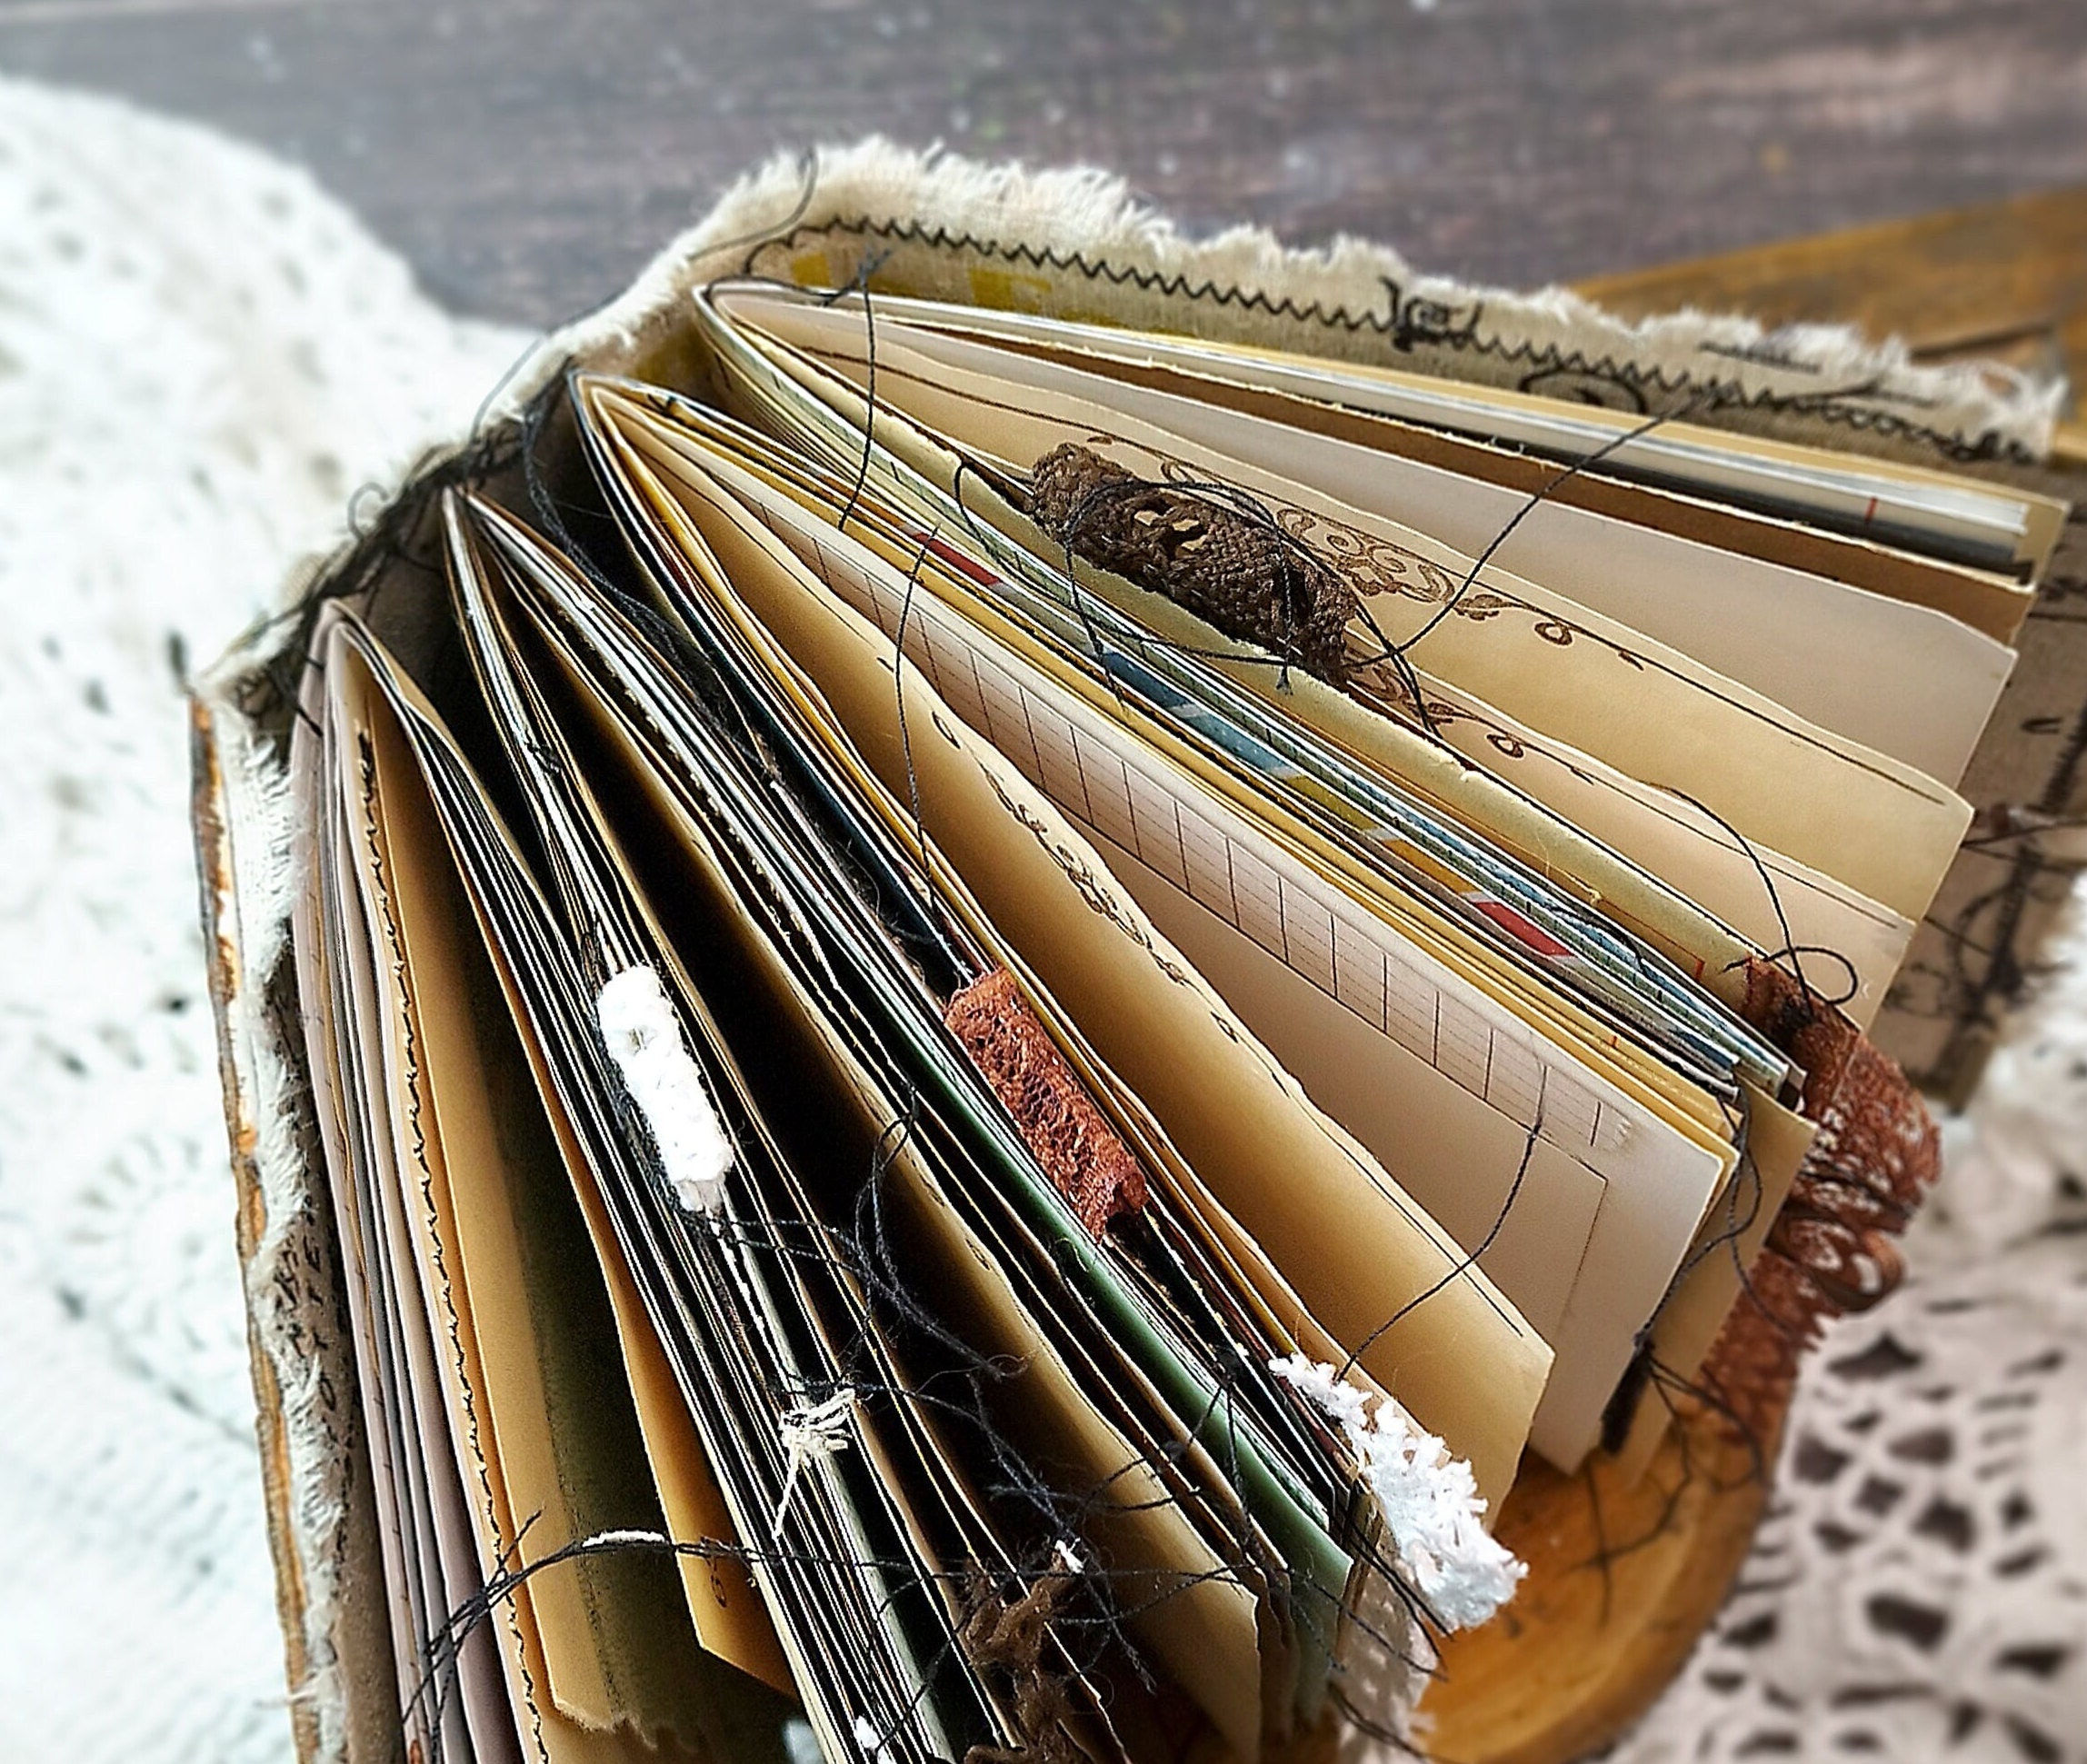 The Intriguing History Of Junk Journals